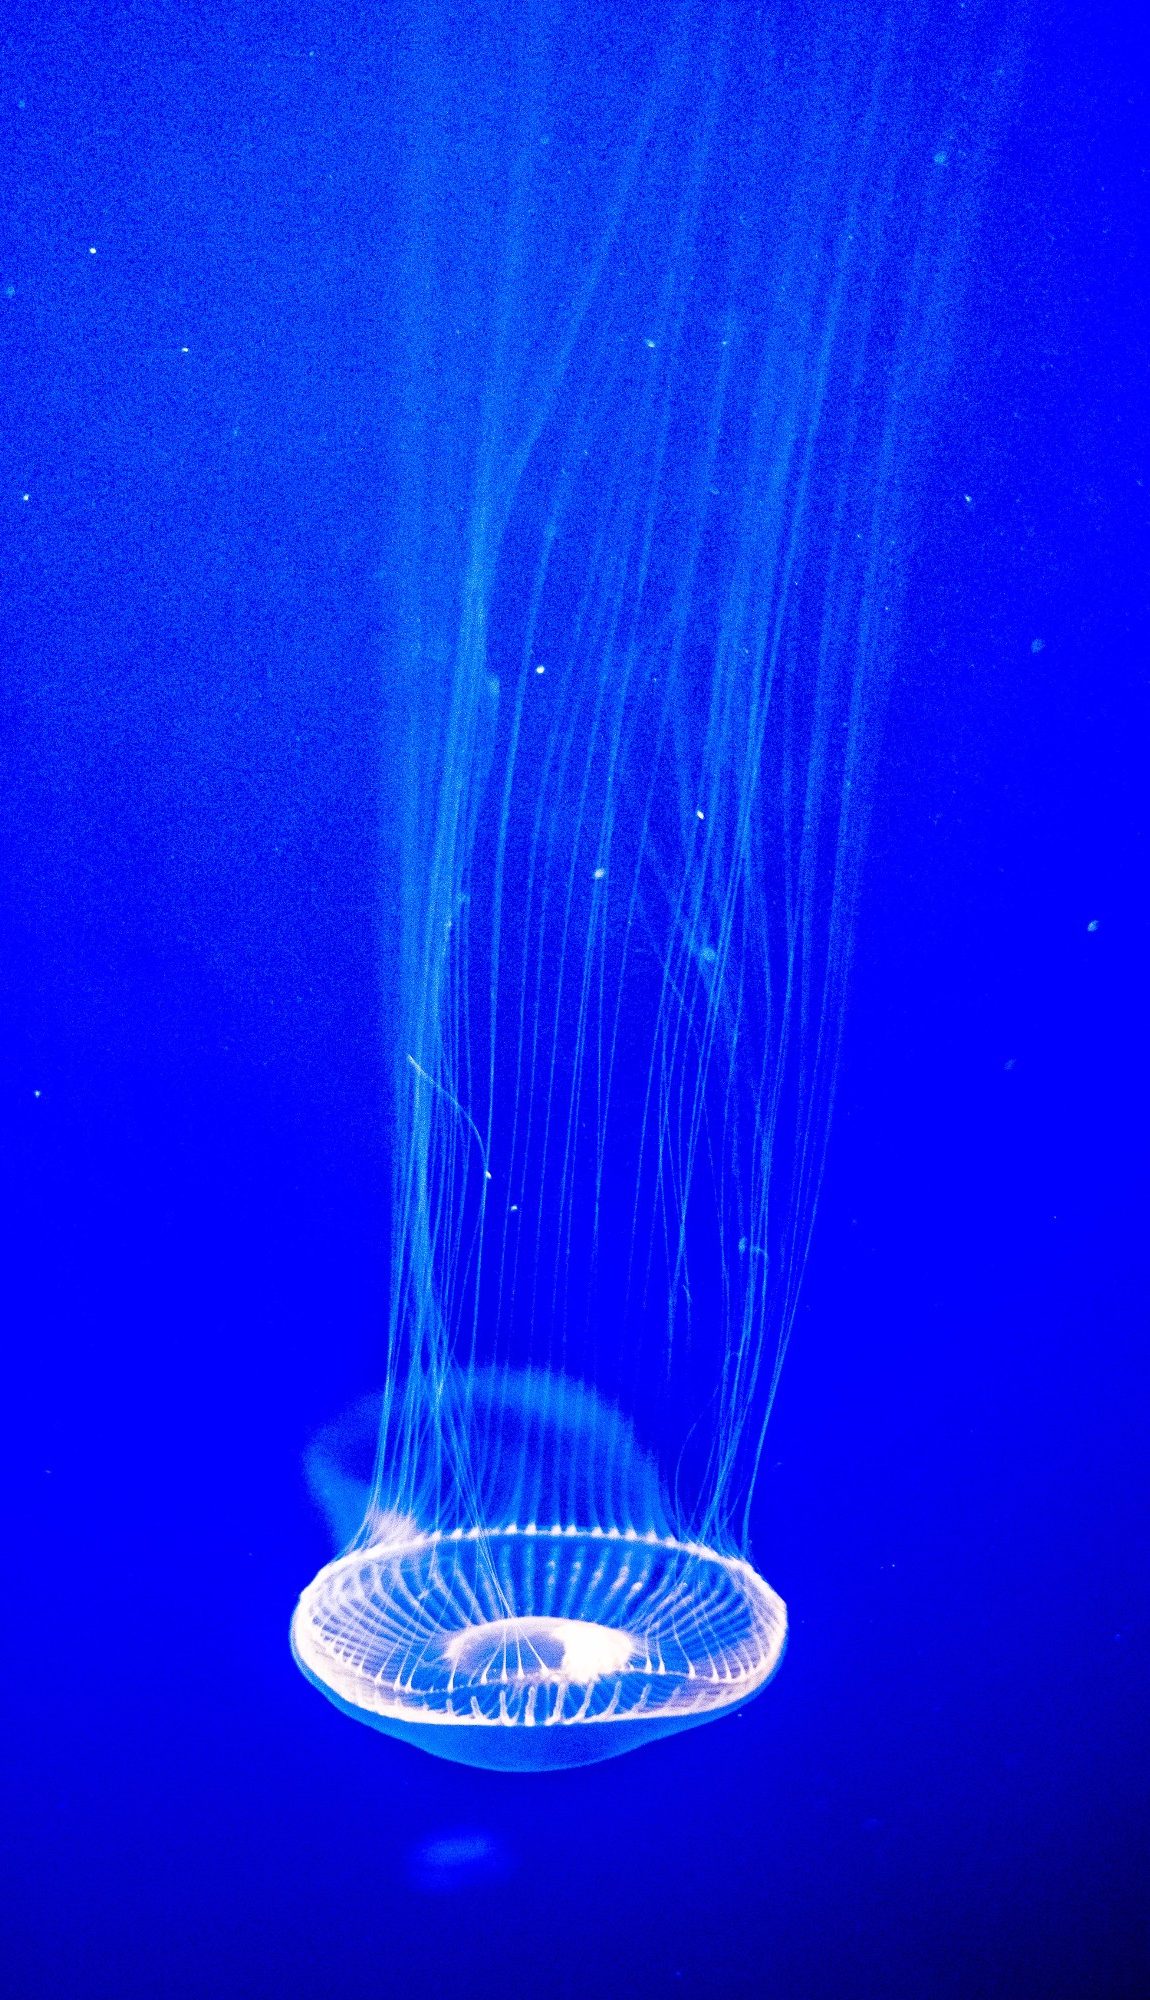 White Jellyfish in blue waters